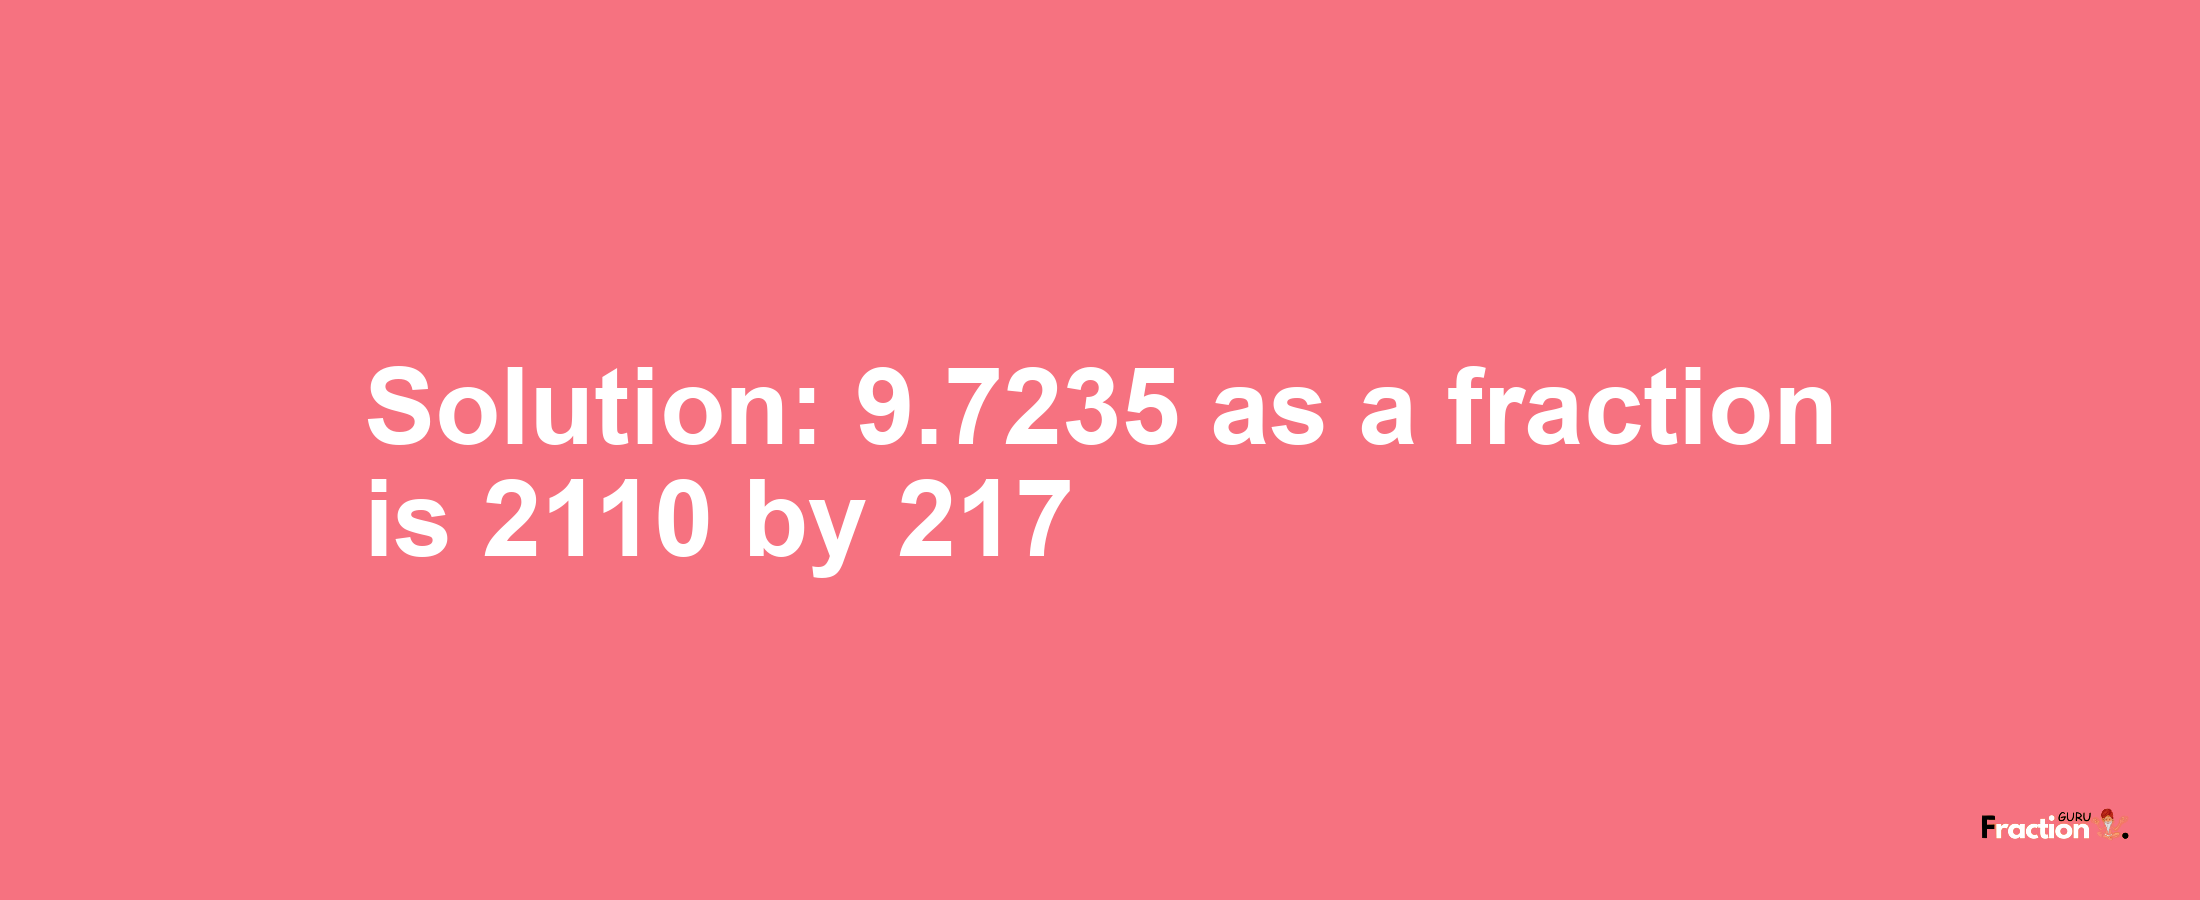 Solution:9.7235 as a fraction is 2110/217